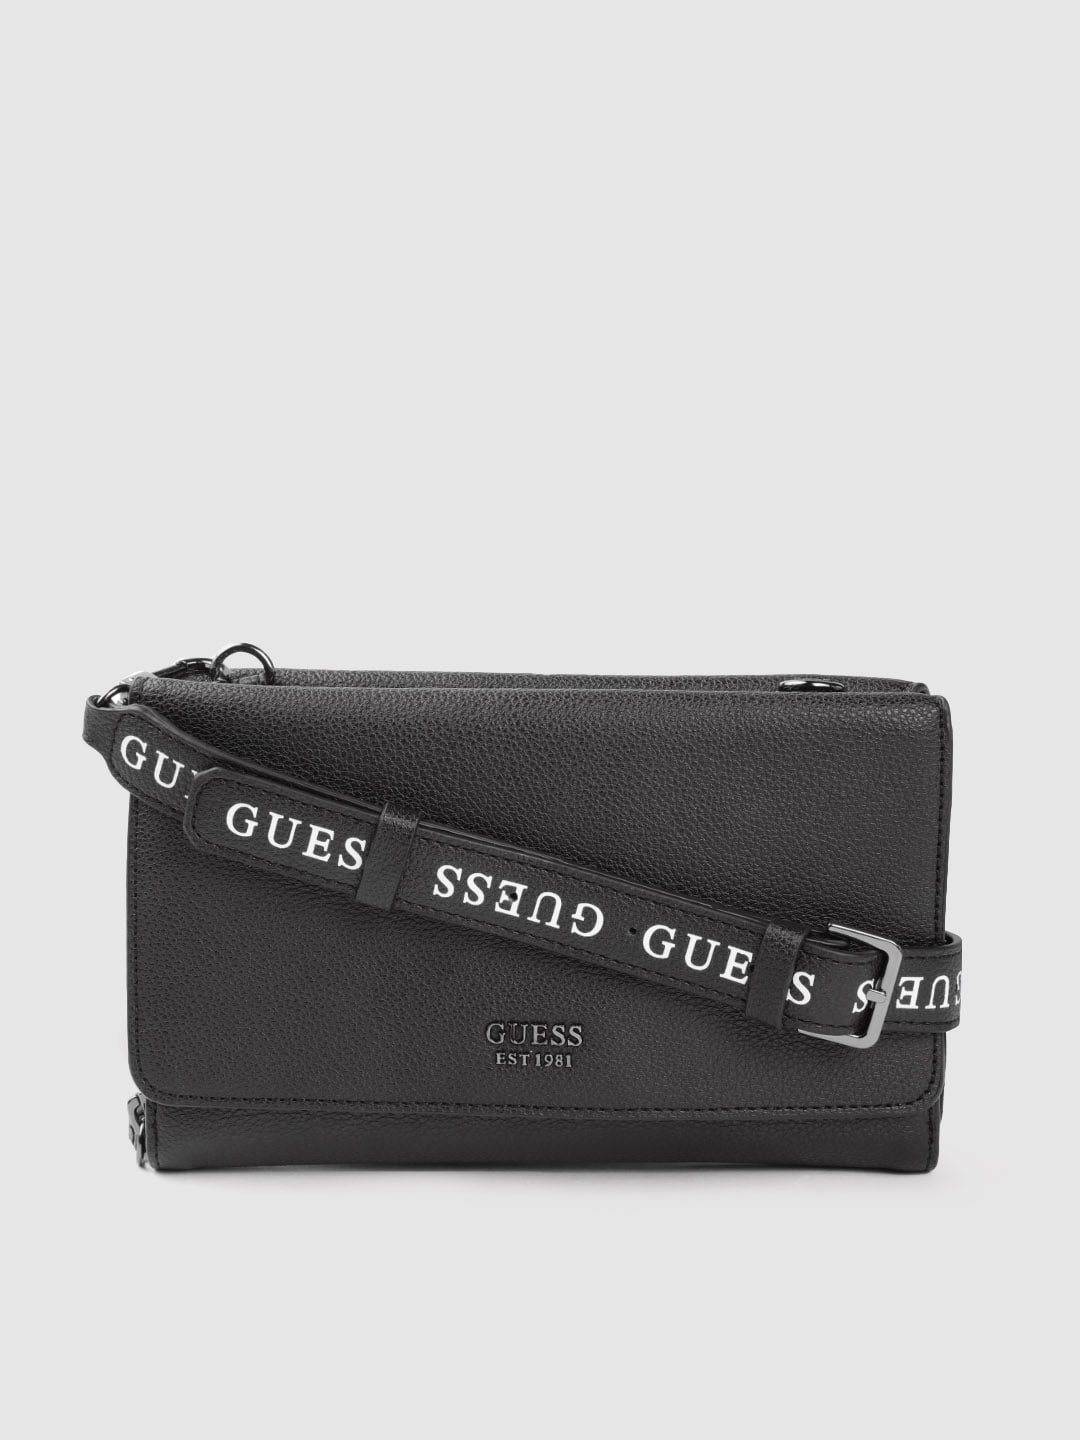 GUESS Black Solid Structured Sling Bag Price in India